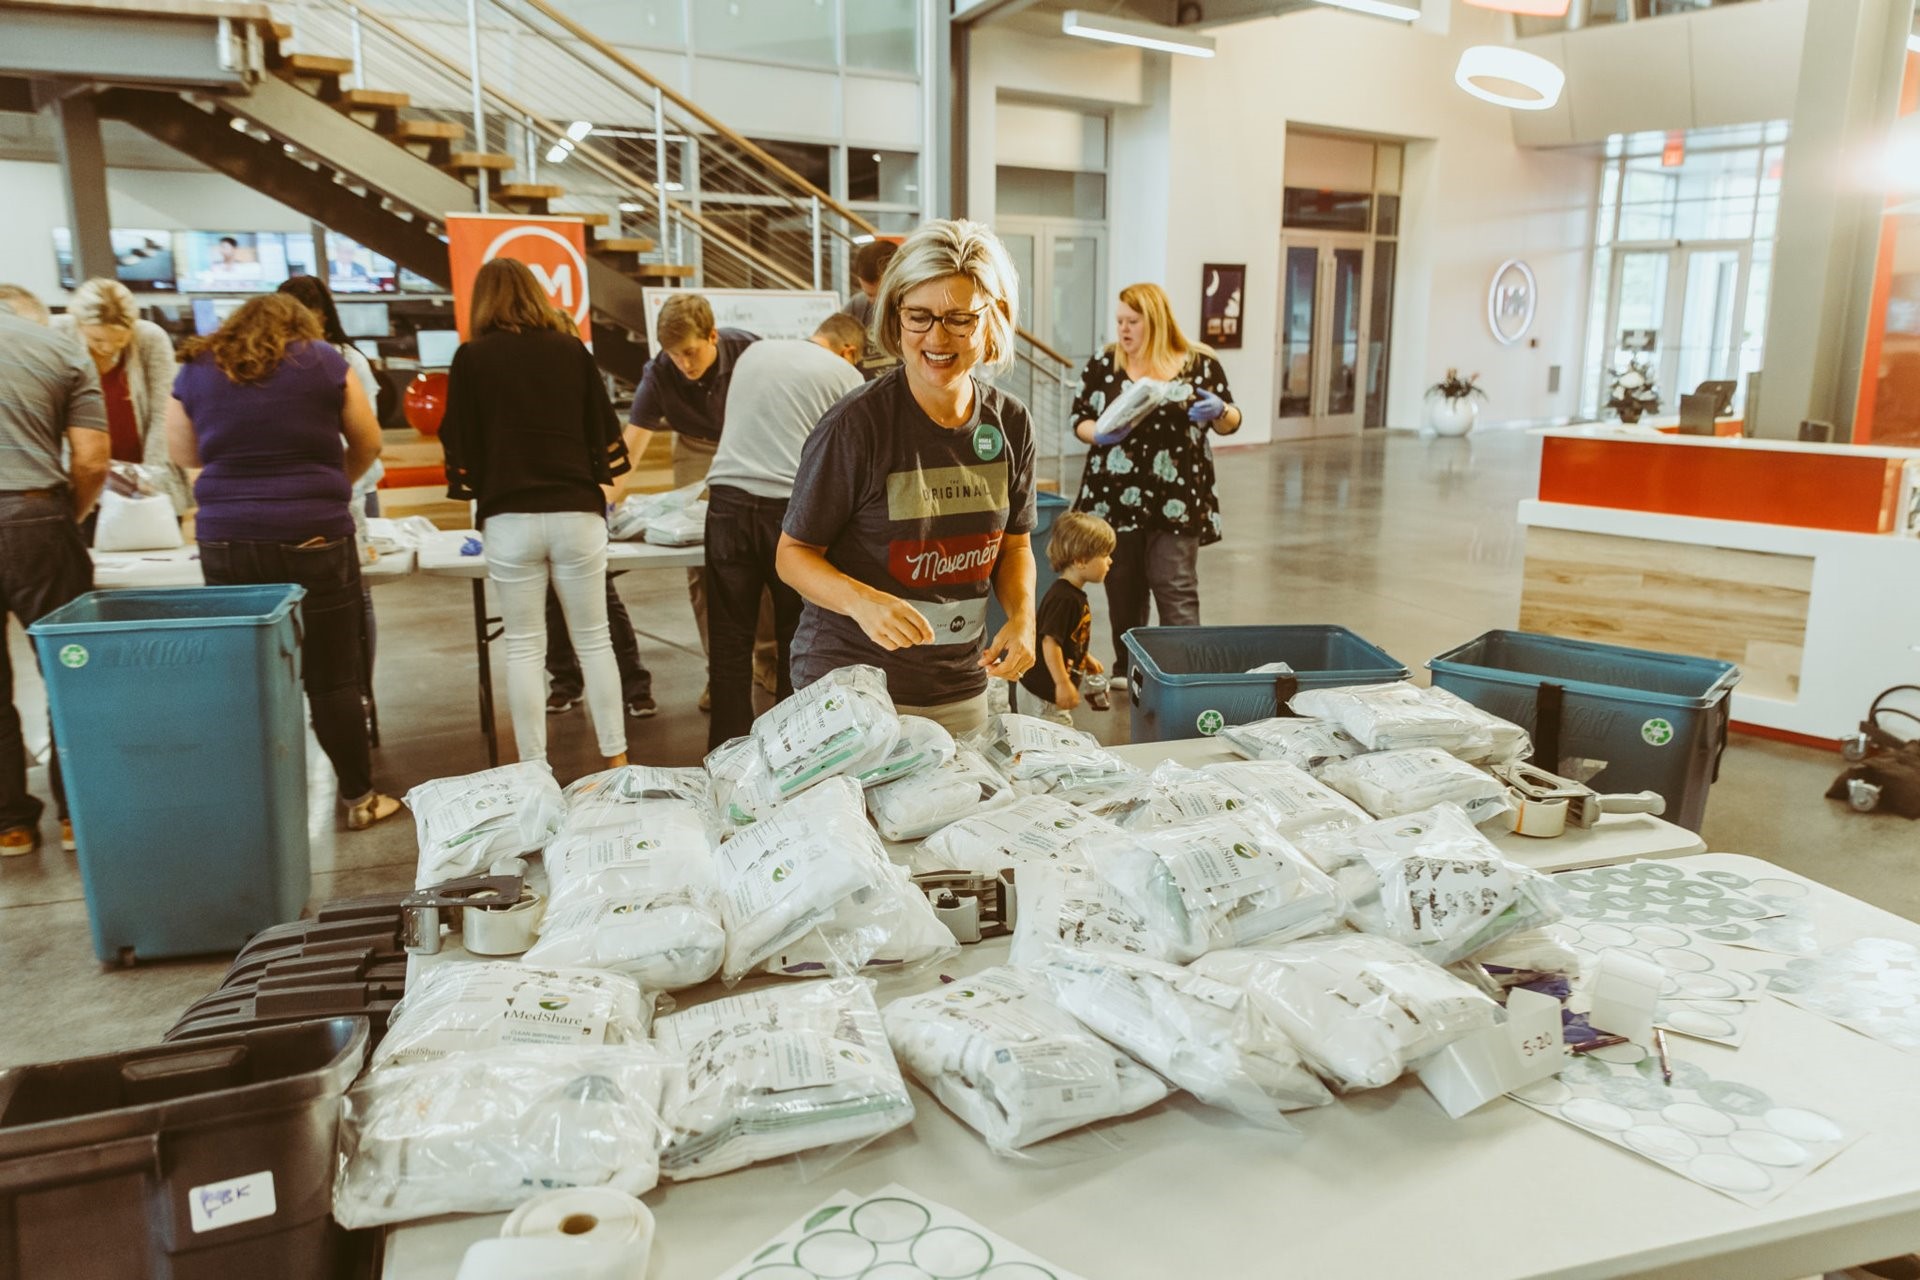 Movement Mortgage raises $15,830 and packs 1,000 Clean Birthing Kits